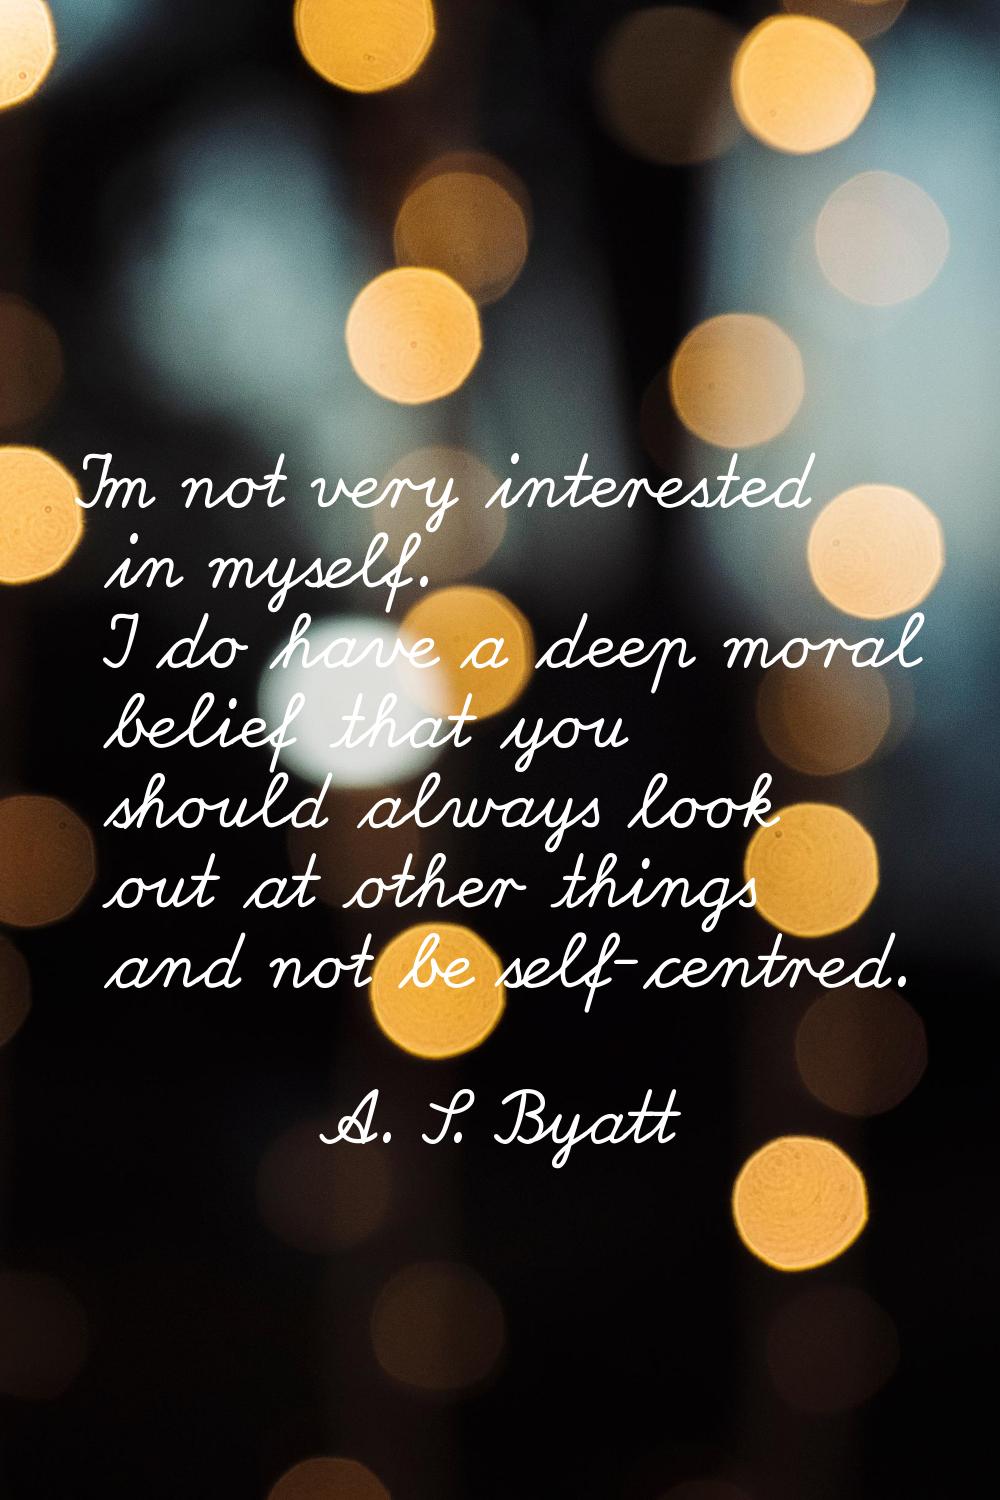 I'm not very interested in myself. I do have a deep moral belief that you should always look out at